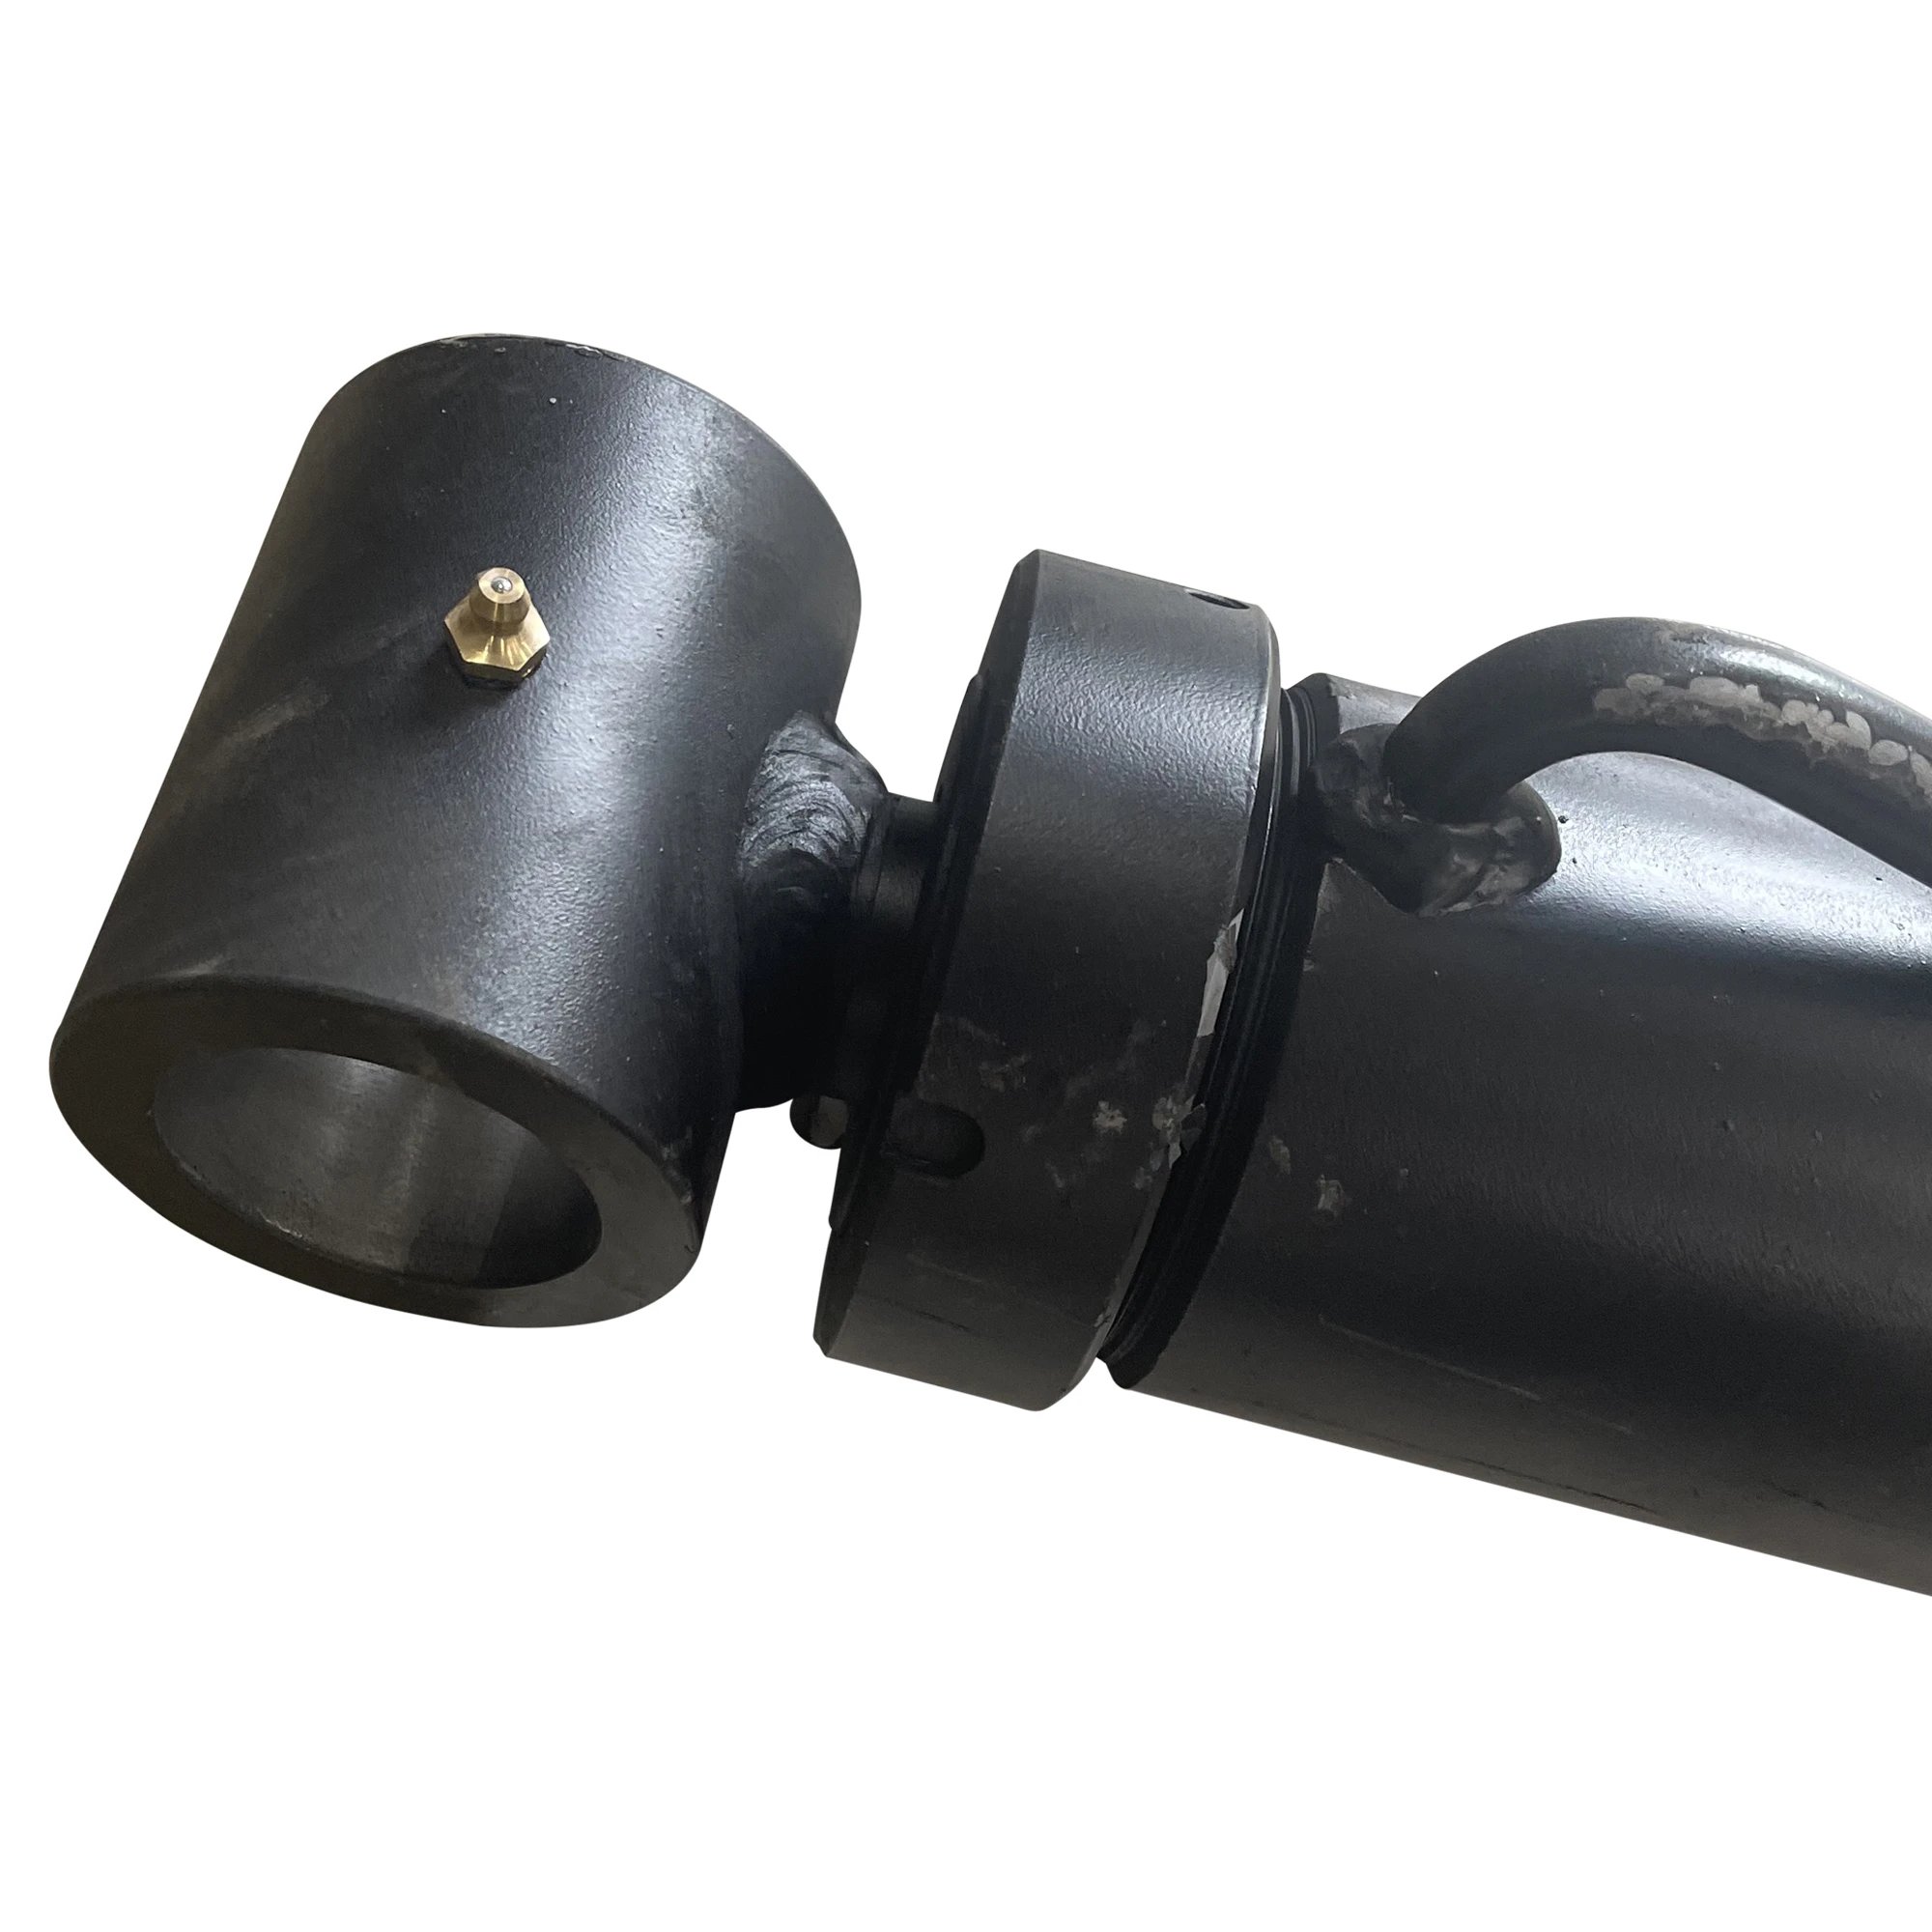 Wastebuilt® Replacement for New Way Tailgate Lift Cylinder 102059 (3" X 1.5" X 42.06")